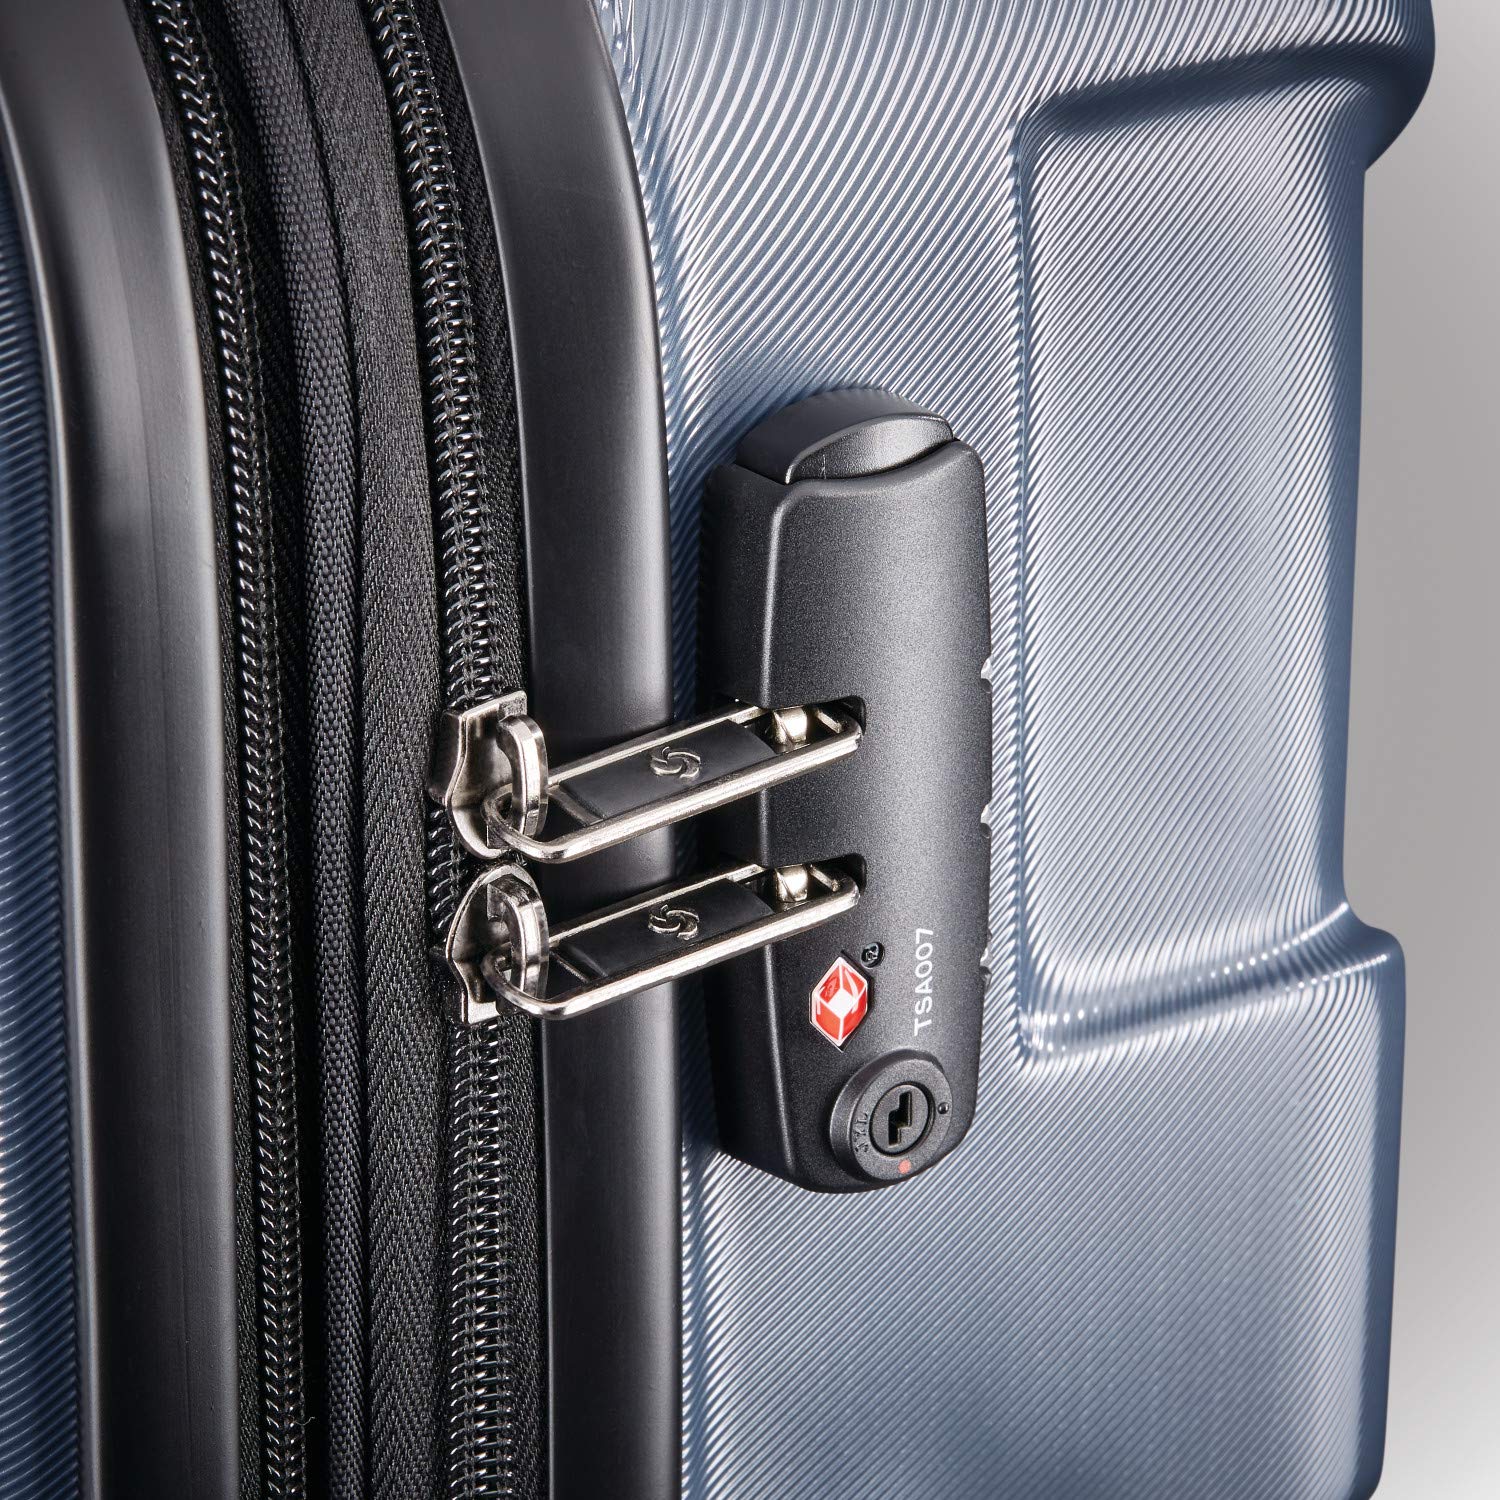 Samsonite Centric Hardside Expandable Luggage with Spinner Wheels, Blue Slate, Carry-On 20-Inch